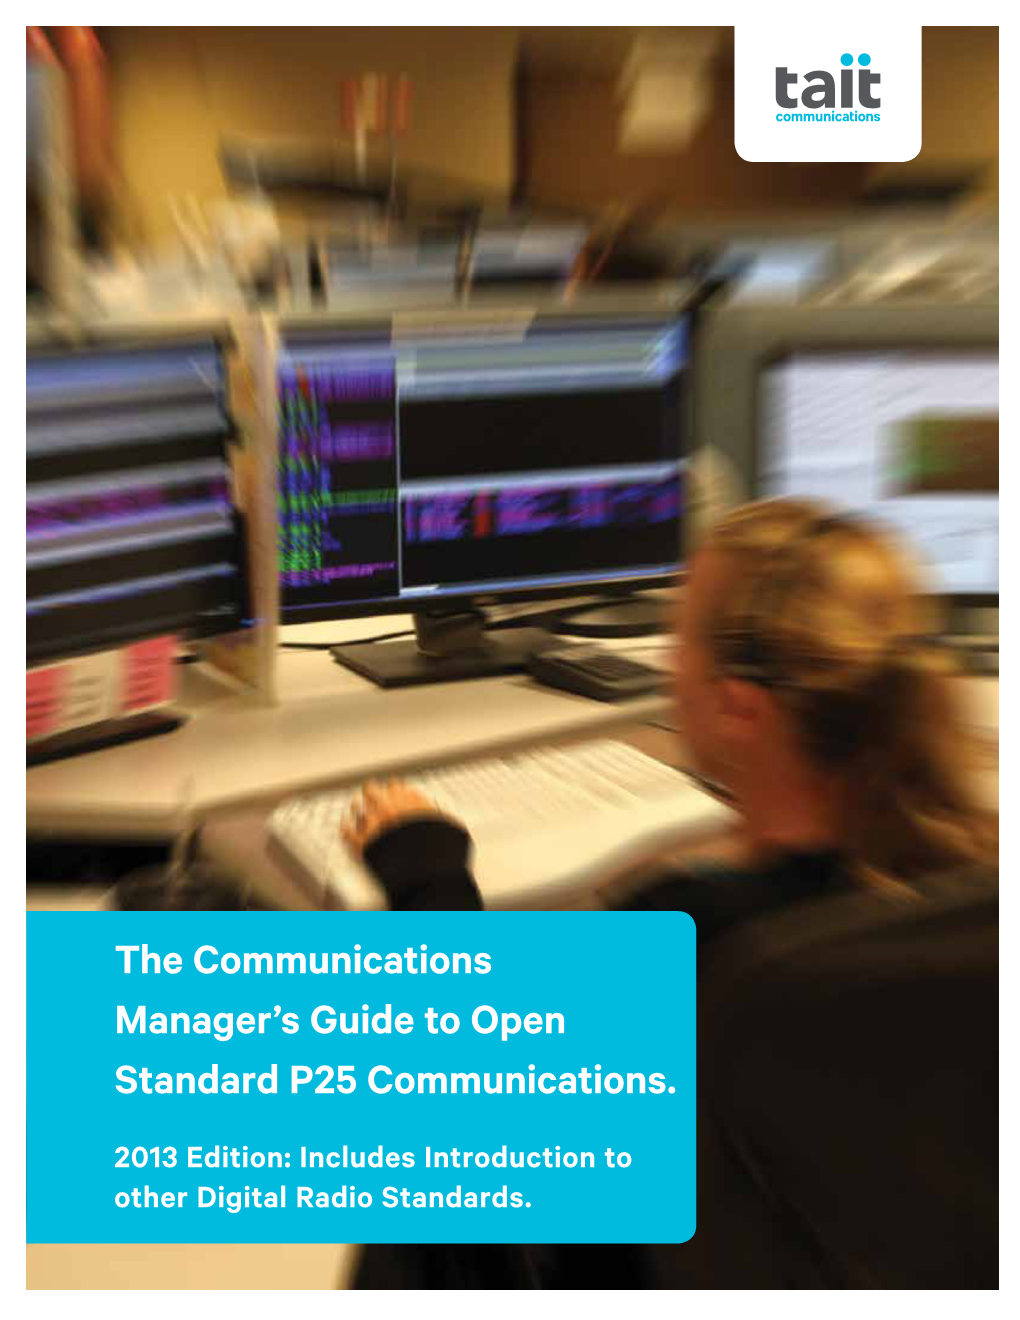 The Communications Manager's Guide to Open Standard P25